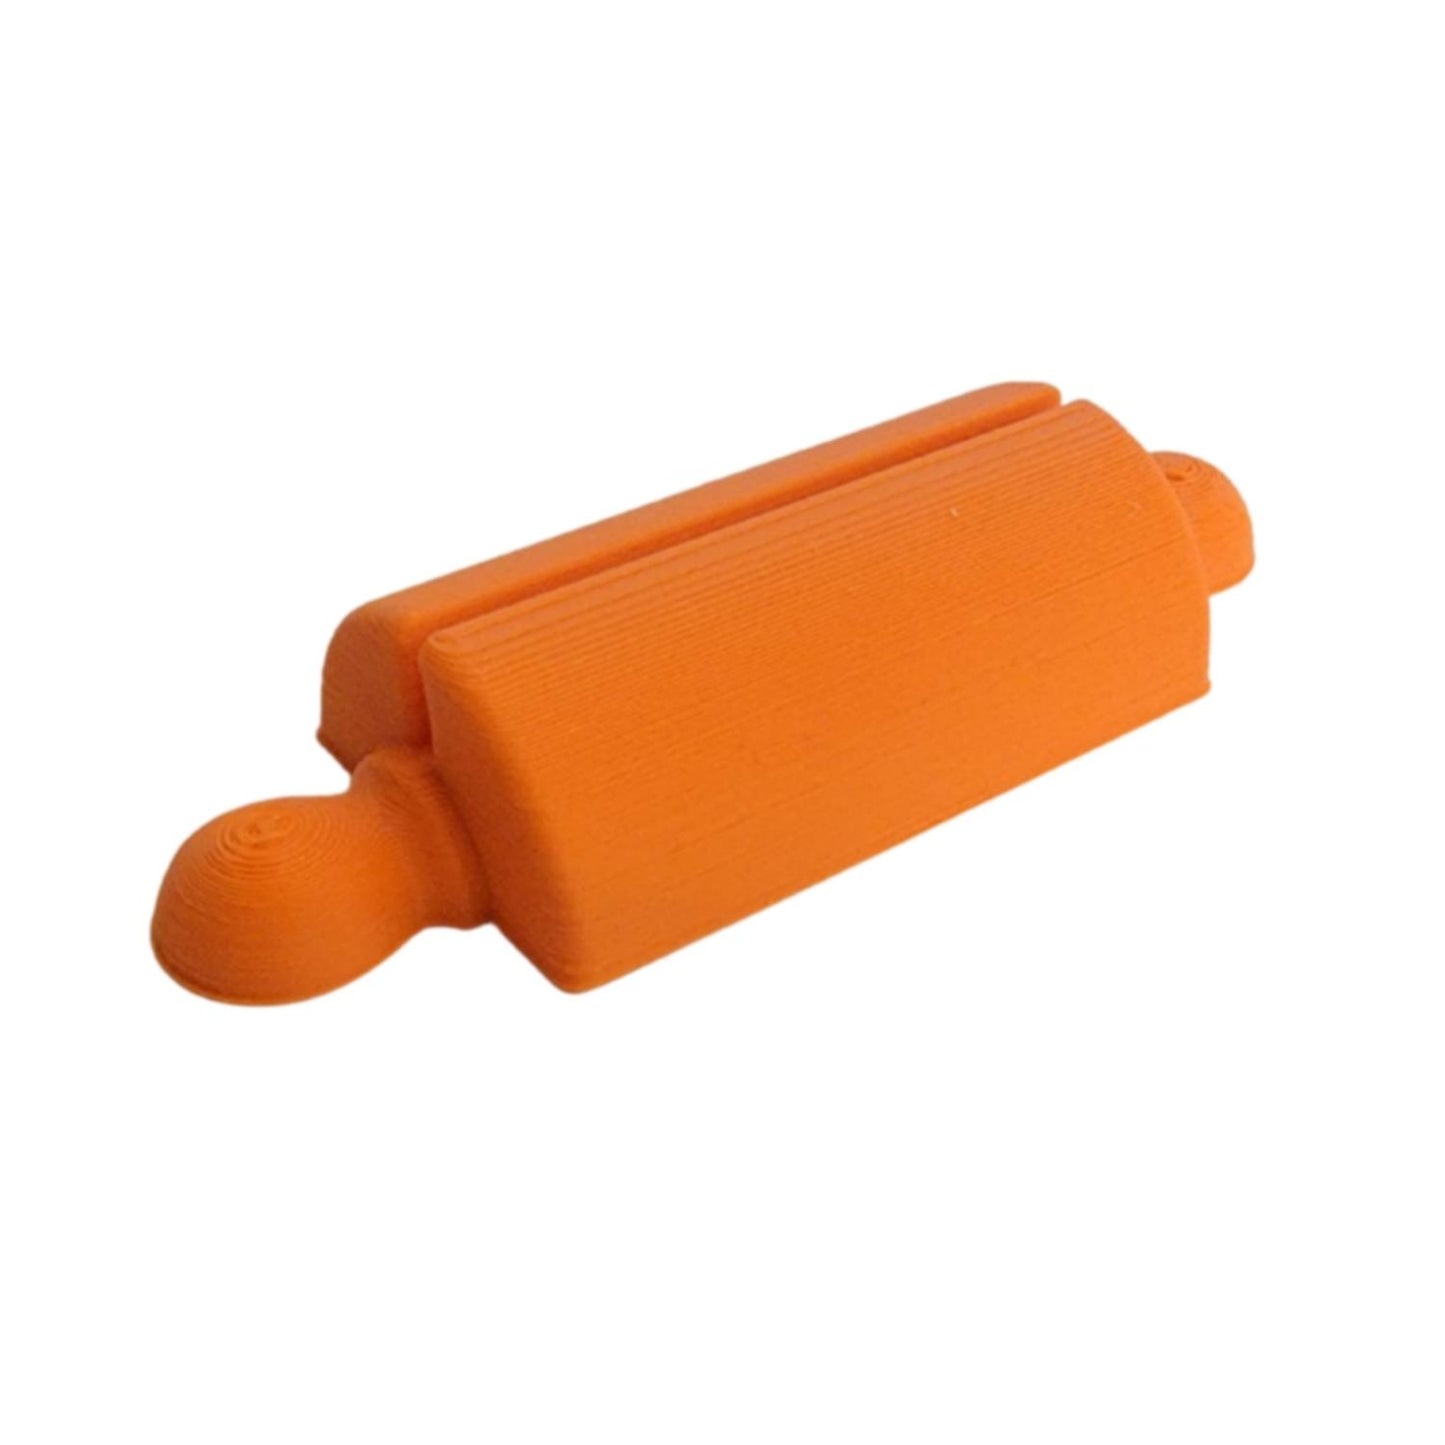 Rolling Pin Recipe Card Stand Business Card Holder - Orange - Made In USA PR4729